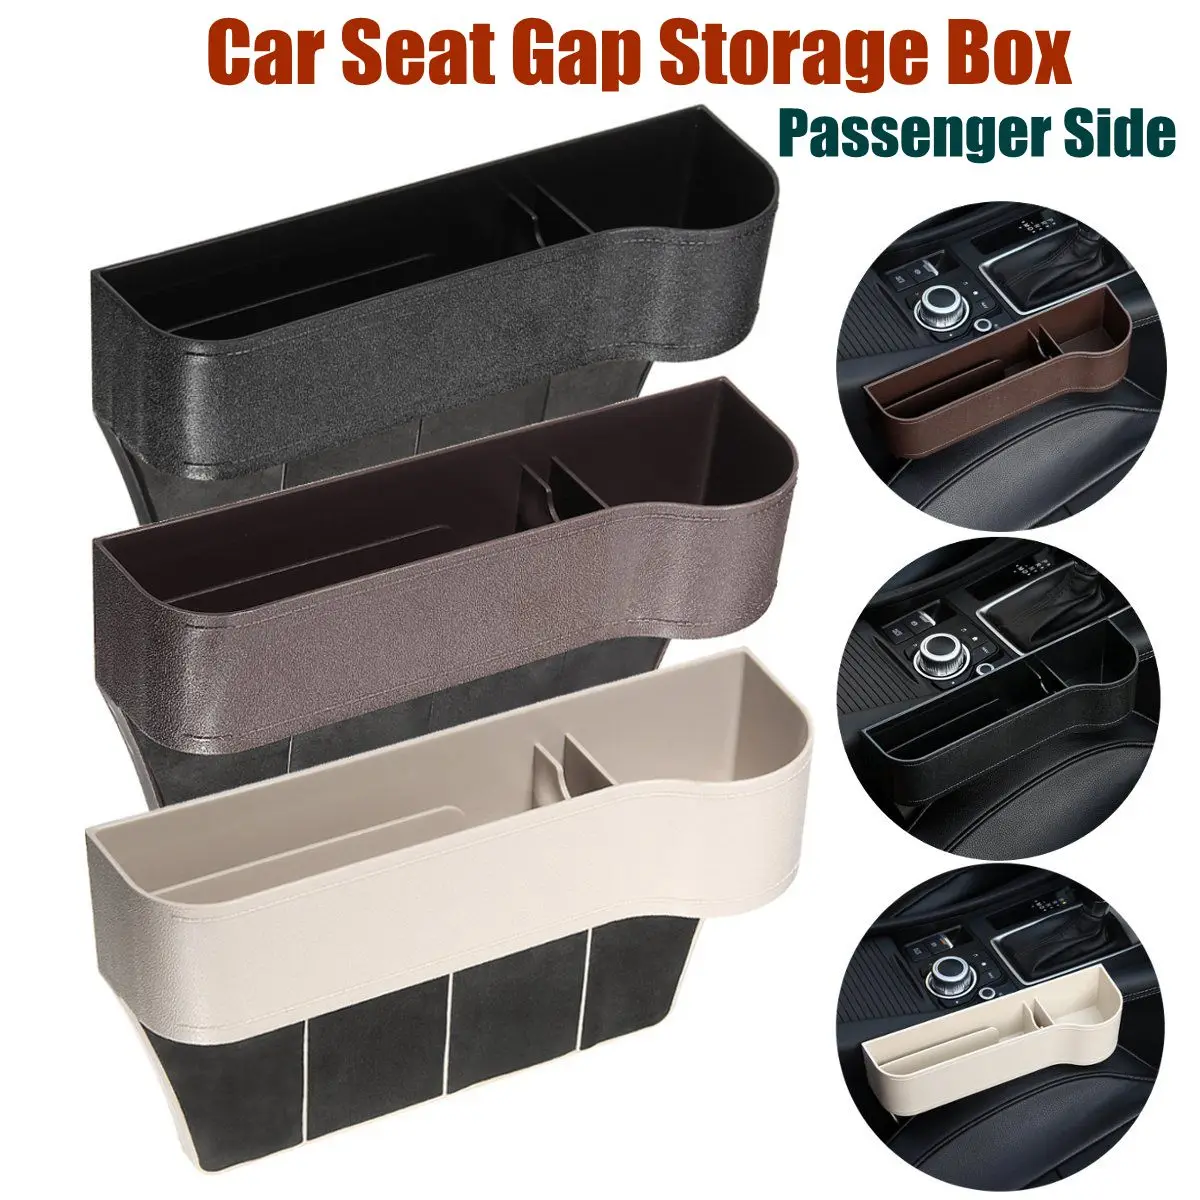 

Left / Right Car Seat Crevice Gaps Storage Box ABS Plastic Auto Drink for Pockets Organizers Stowing Tidying Universal